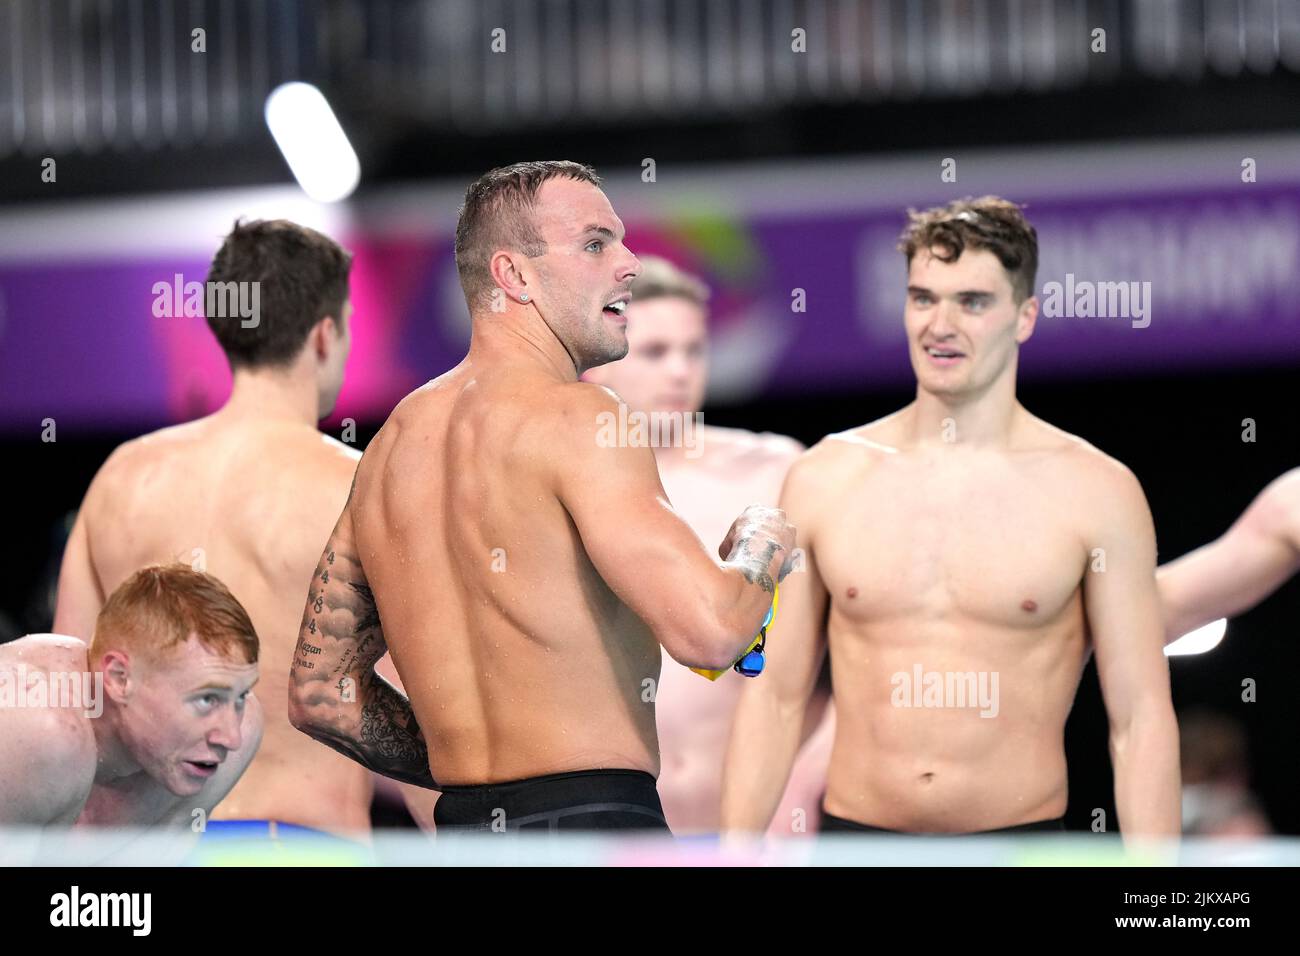 Australia's Kyle Chalmers (centre) and team-mates look frustrated after finishing second in the Men's 4 x 100m Medley Relay Final at the Sandwell Aquatics Centre on day six of the 2022 Commonwealth Games in Birmingham. Picture date: Wednesday August 3, 2022. Stock Photo